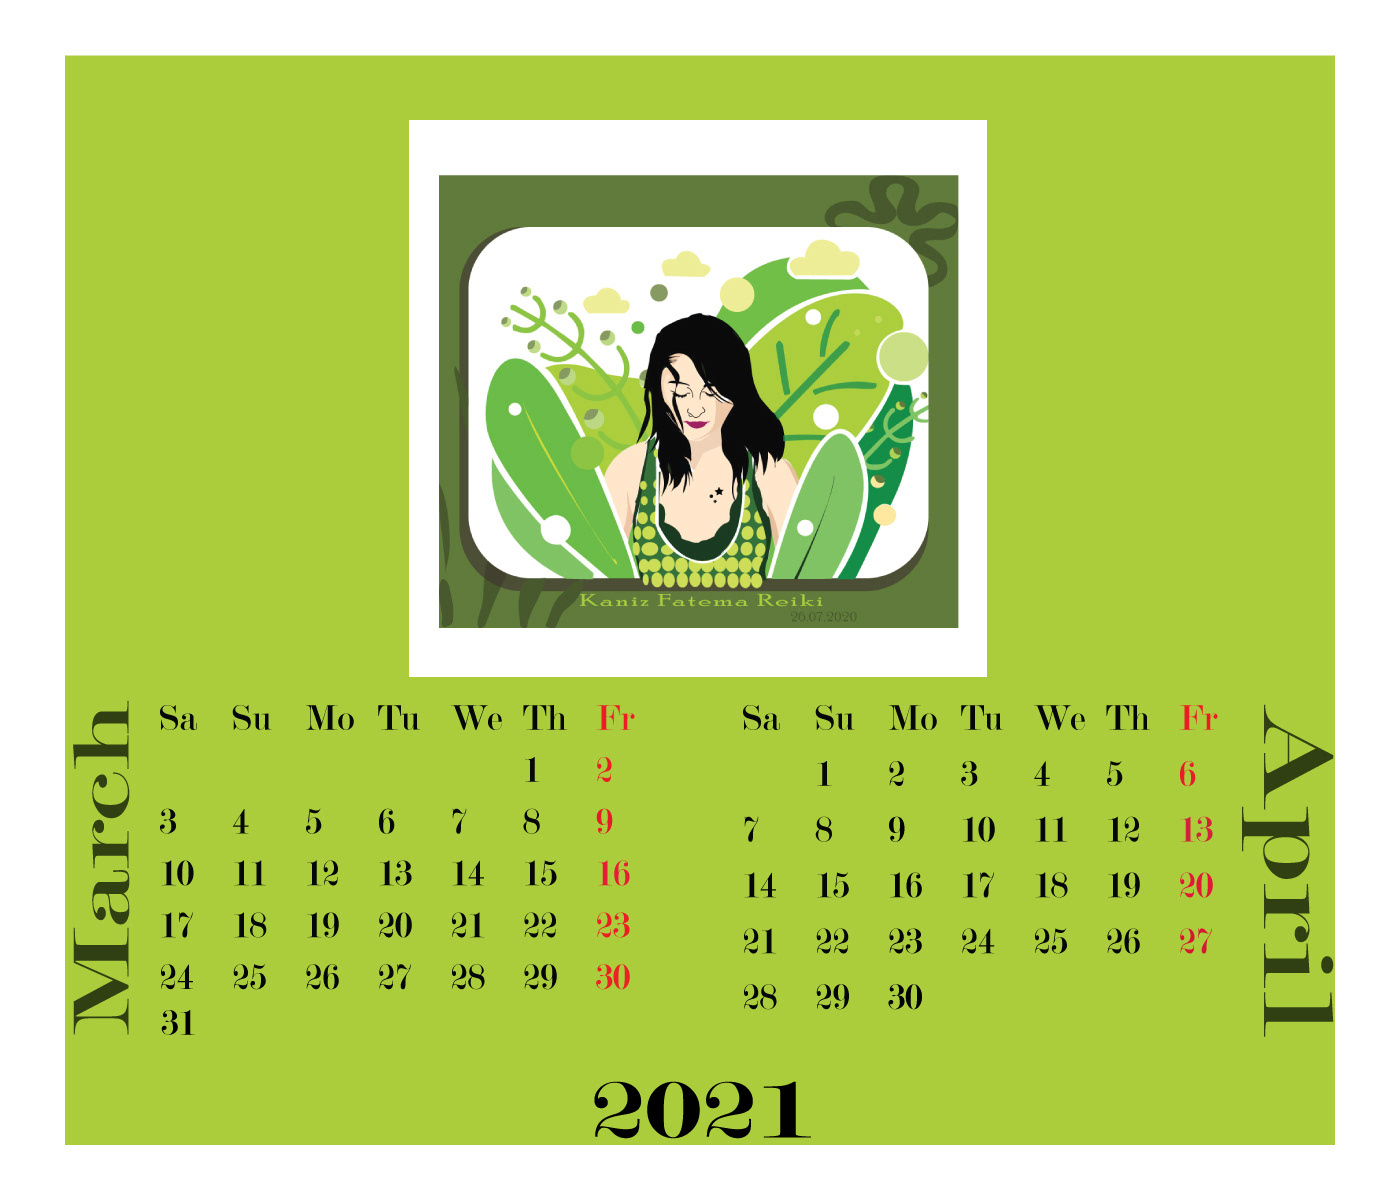 #2021 #calendar #colorful #date #Dhaka #illustration #relaxing #satisfied